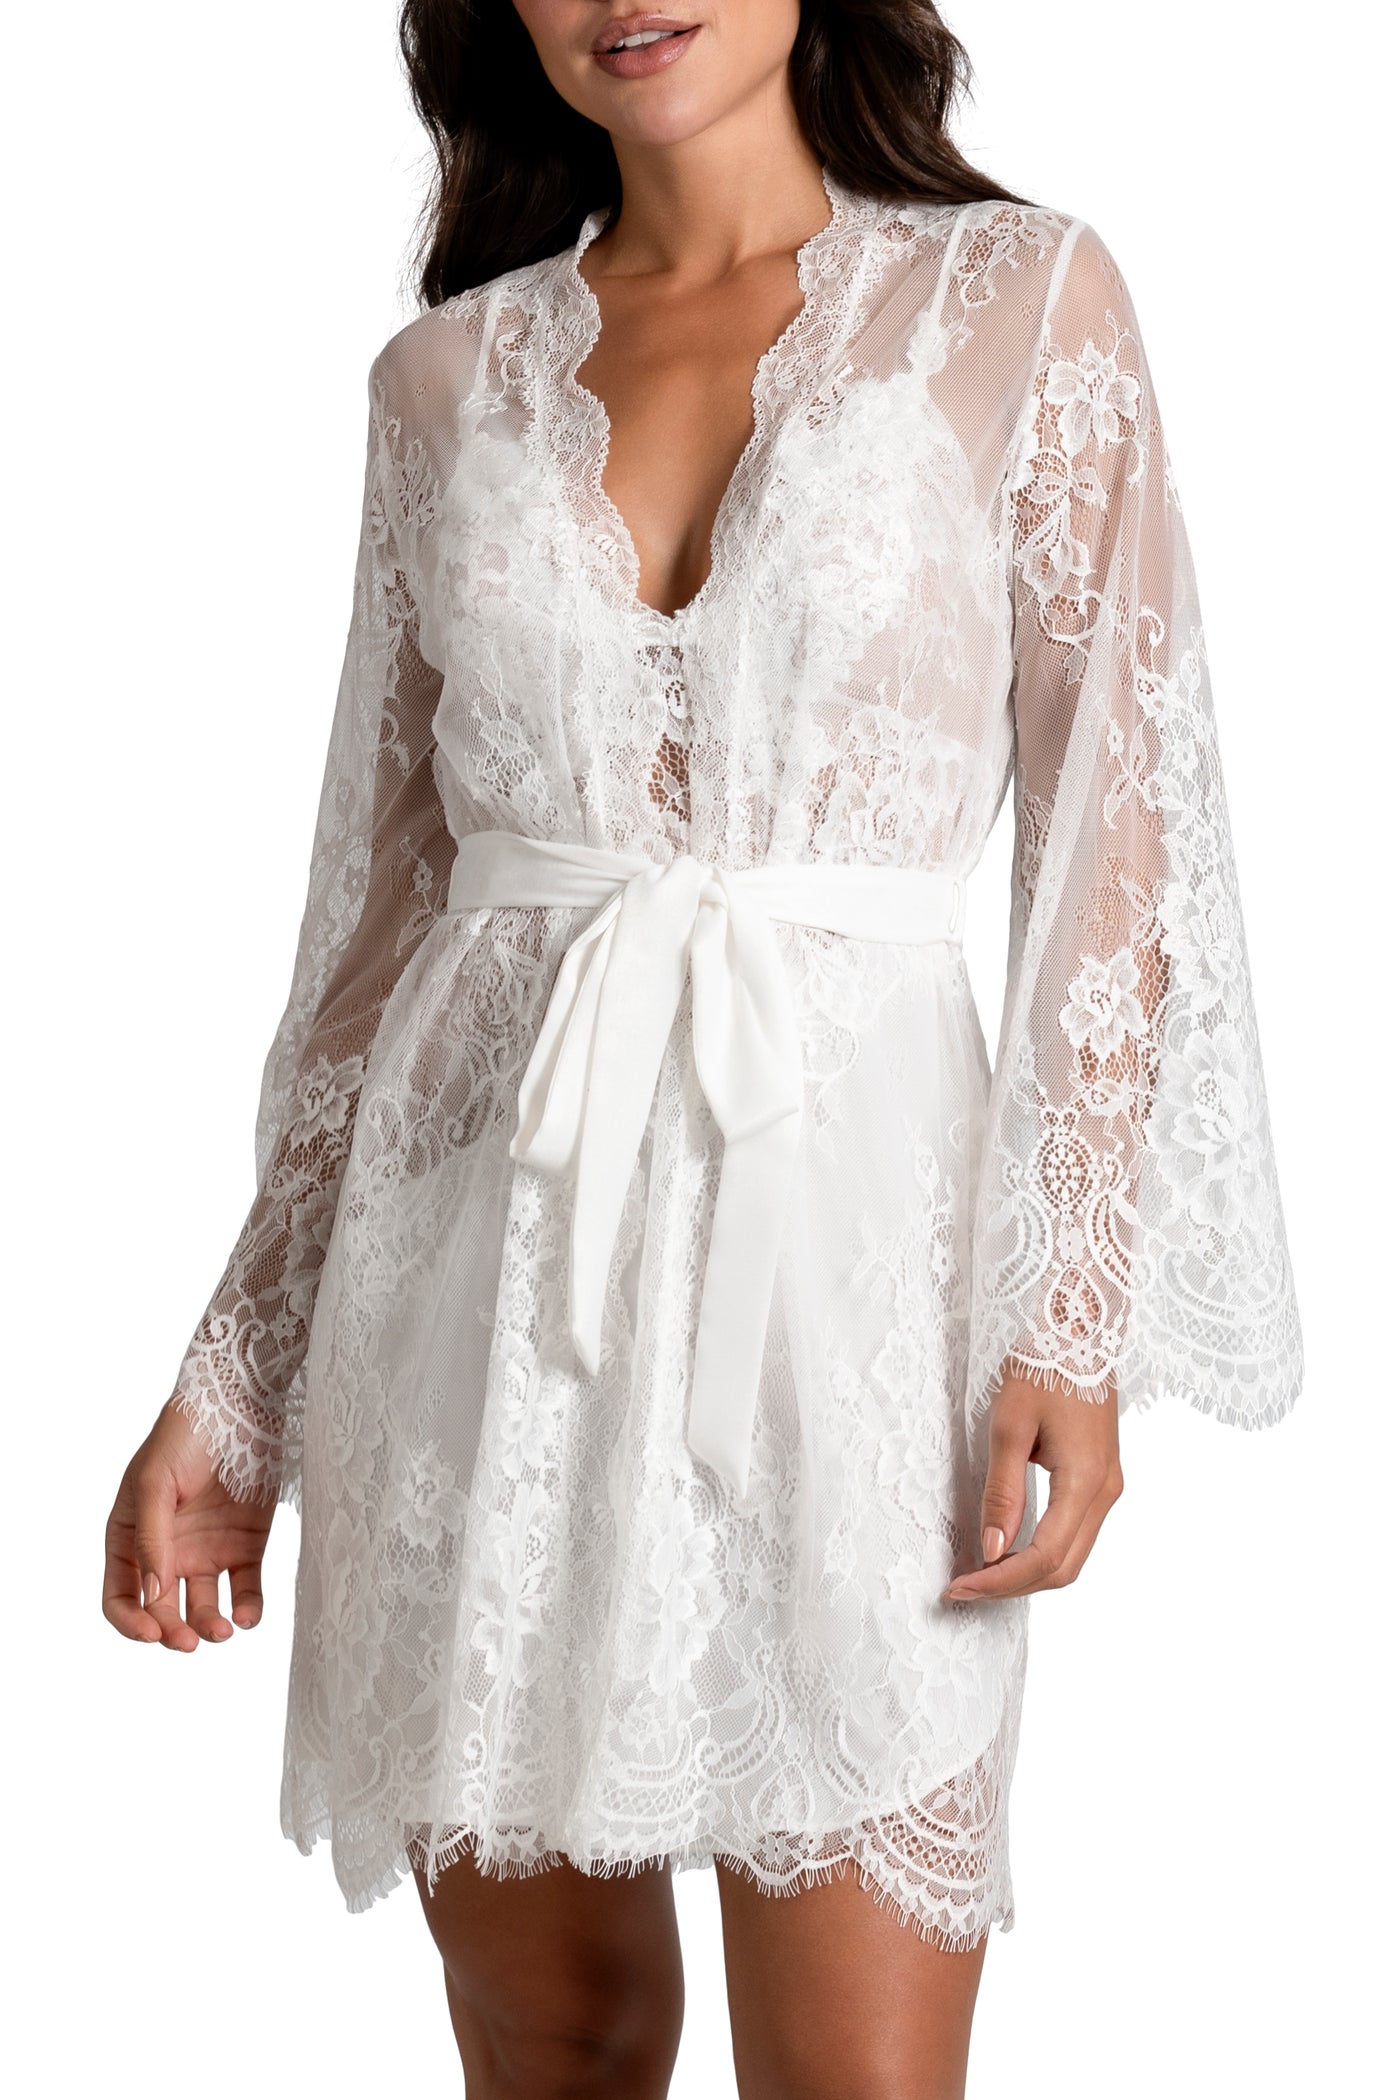 Marry Me Lace Wrap - Ivory